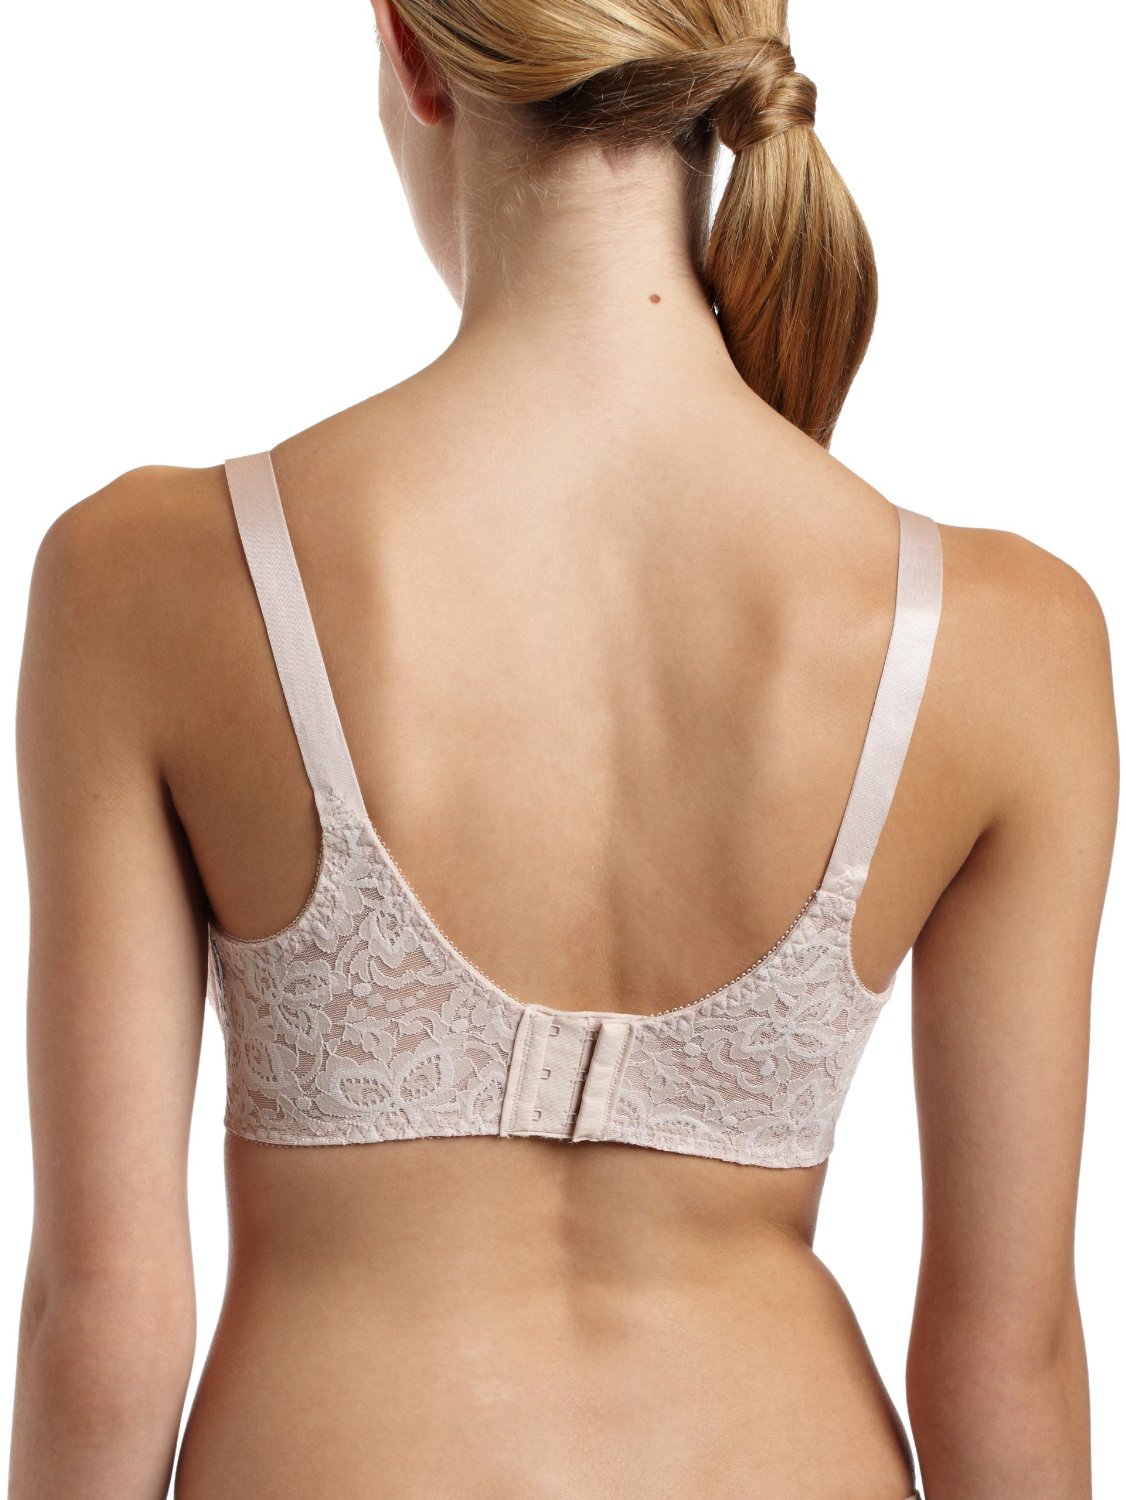 36D, Rosewood) - Bali 3432 Lace Smooth Seamless Underwire Bra Size 36D  85447337827